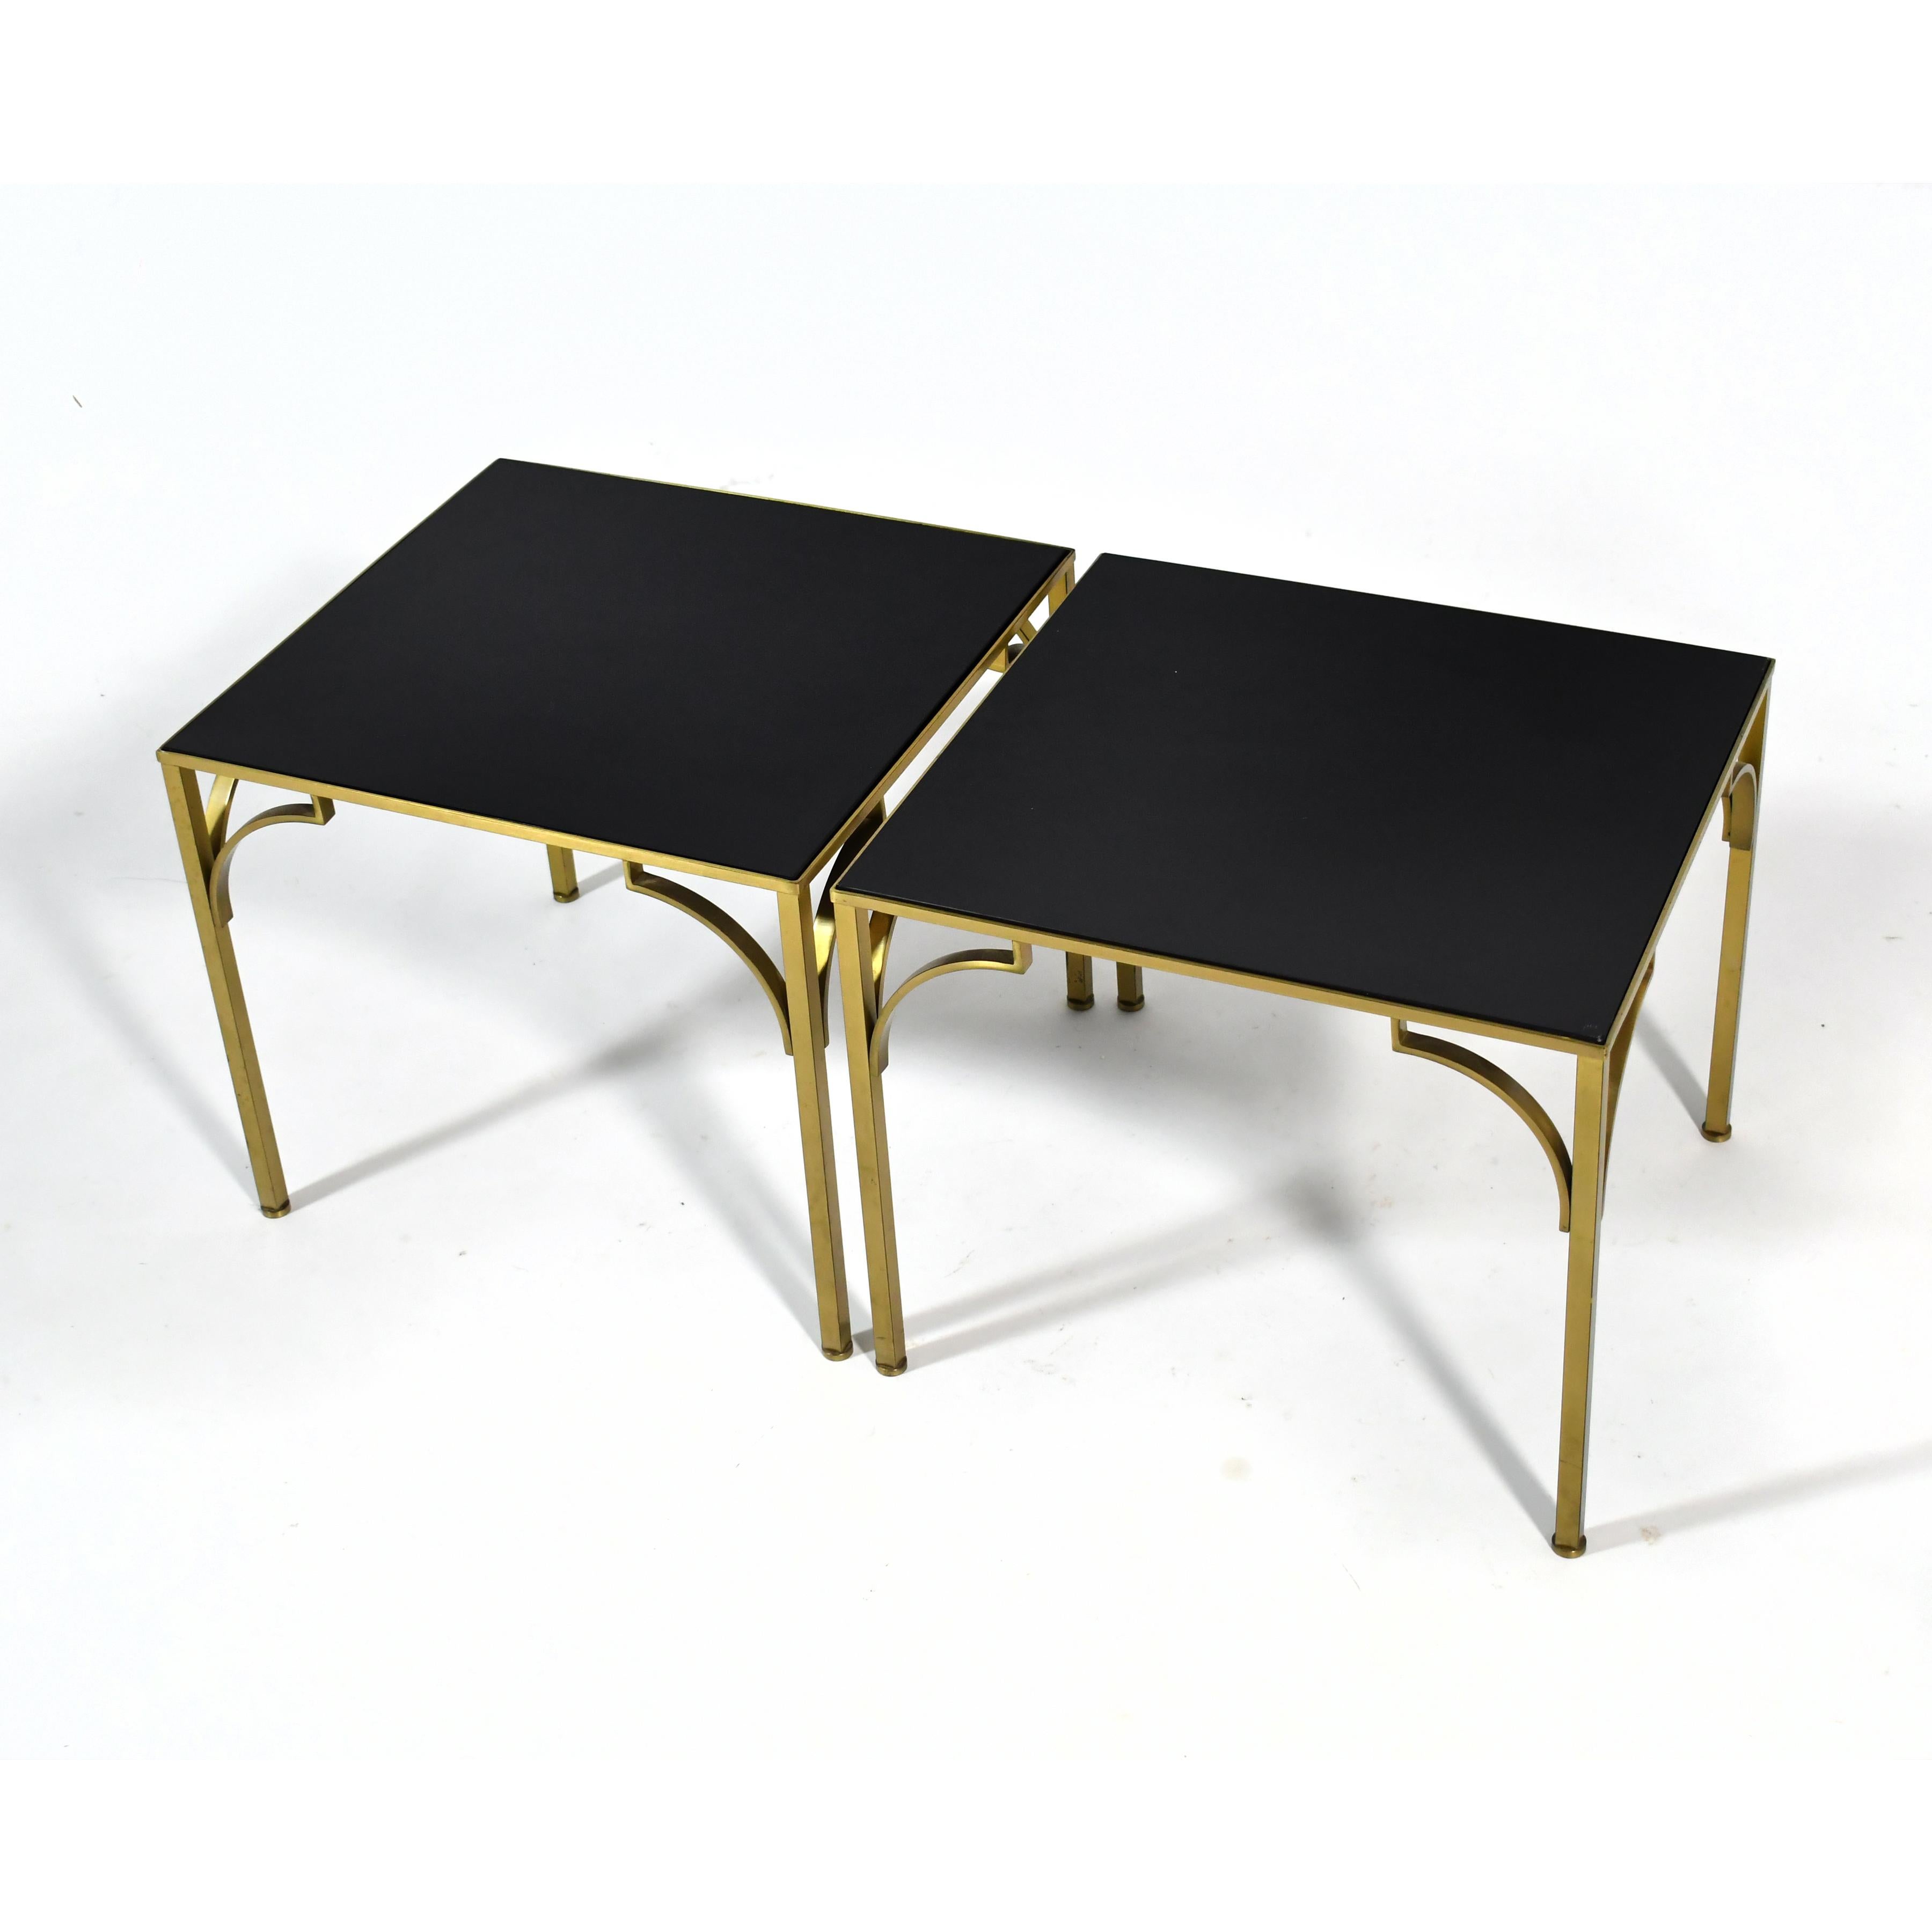 Late 20th Century Pair of Brass Side Tables with Black Glass Tops For Sale